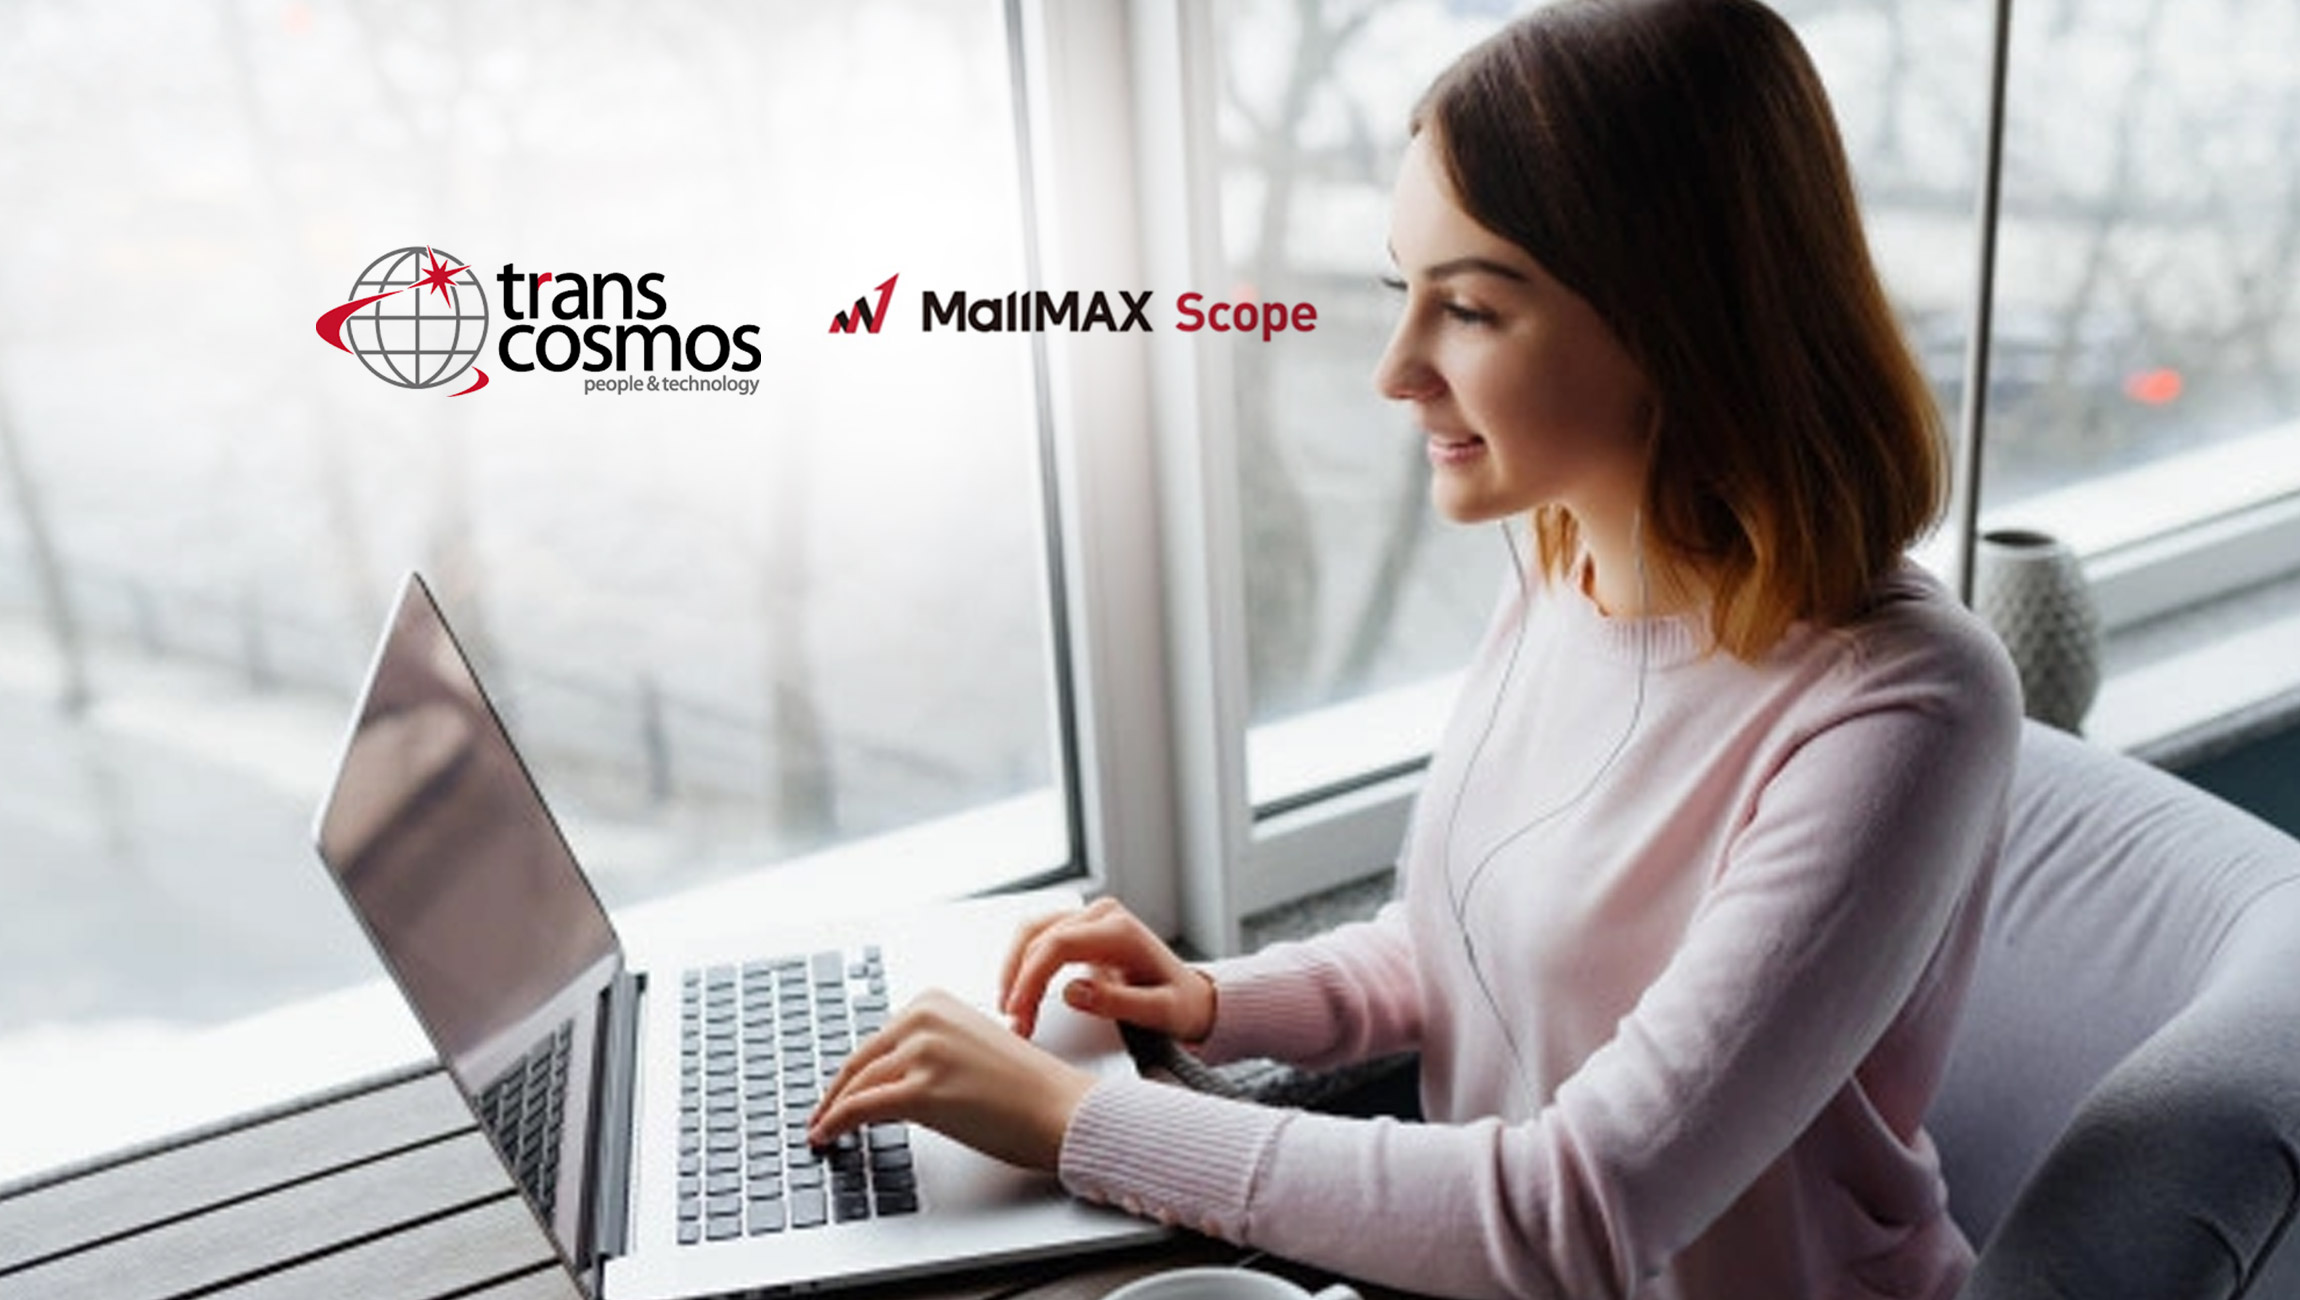 transcosmos-releases-MallMAX-Scope_-its-proprietary-diagnostics-_-analytics-services-that-help-maximize-sales-on-online-shopping-malls